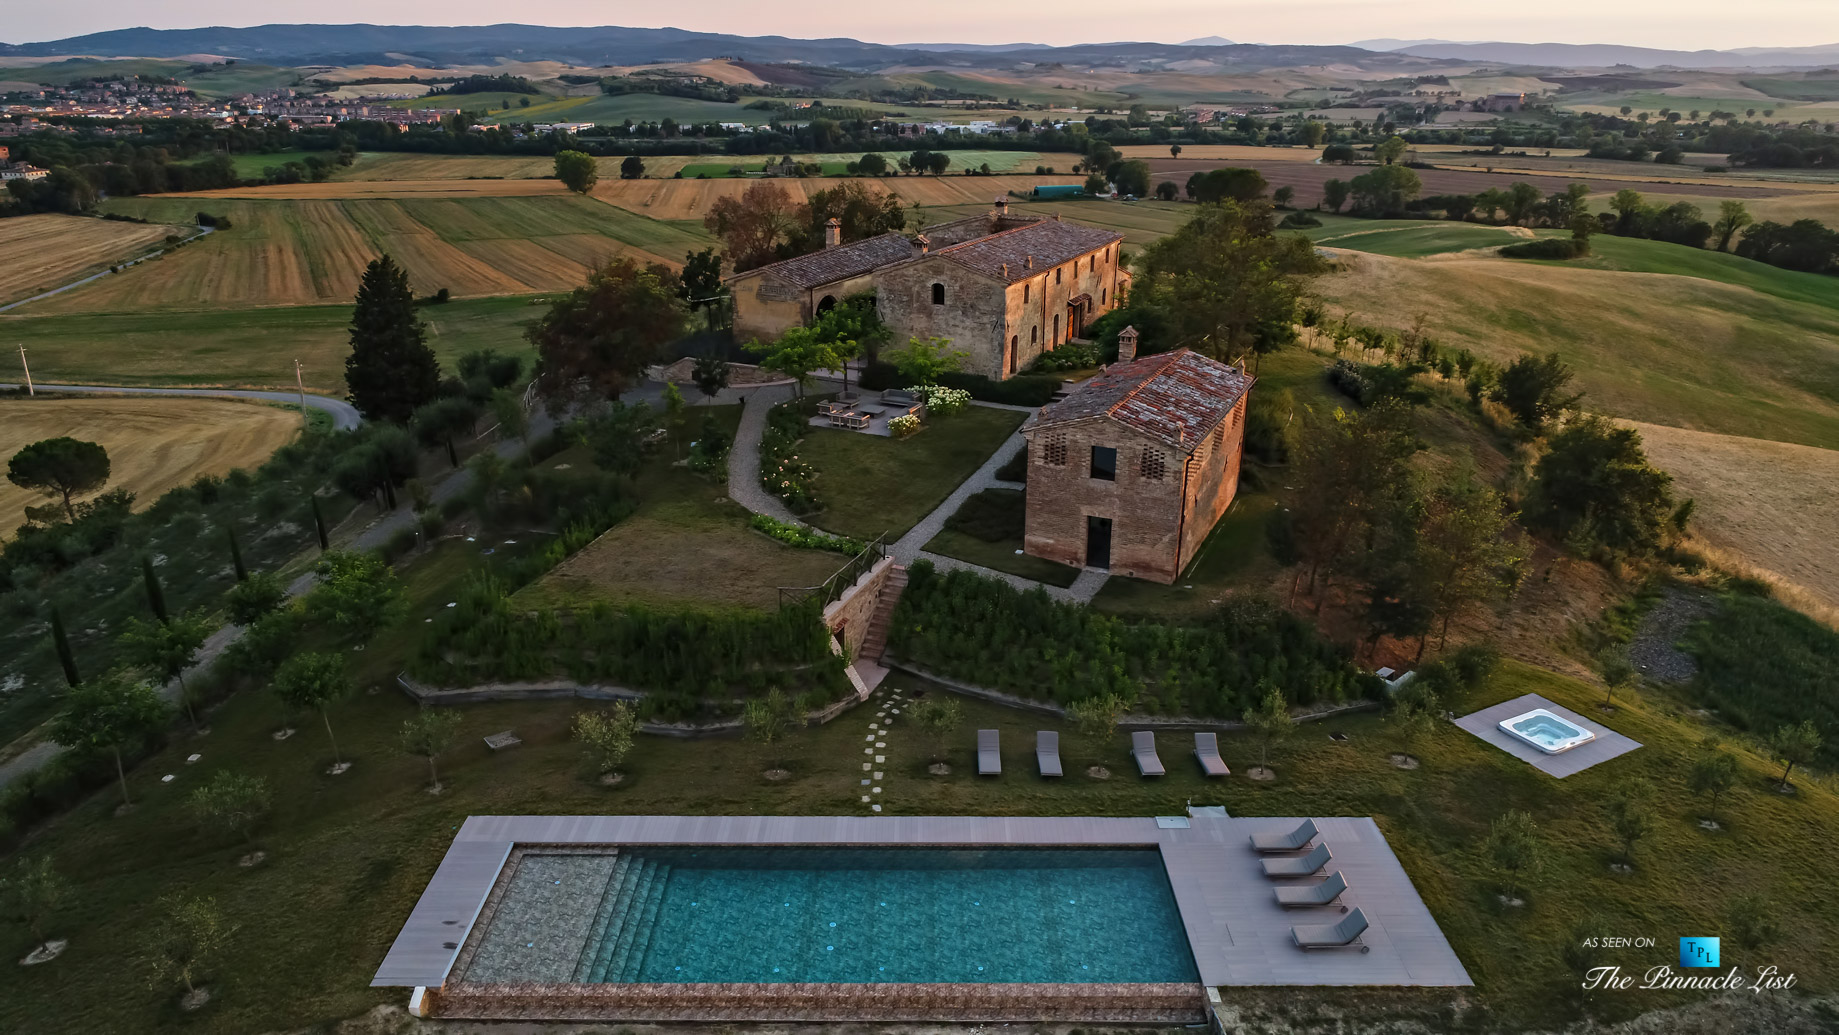 Podere Paníco Estate - Monteroni d'Arbia, Tuscany, Italy - Sunset Aerial Property Pool View - Luxury Real Estate - Tuscan Villa